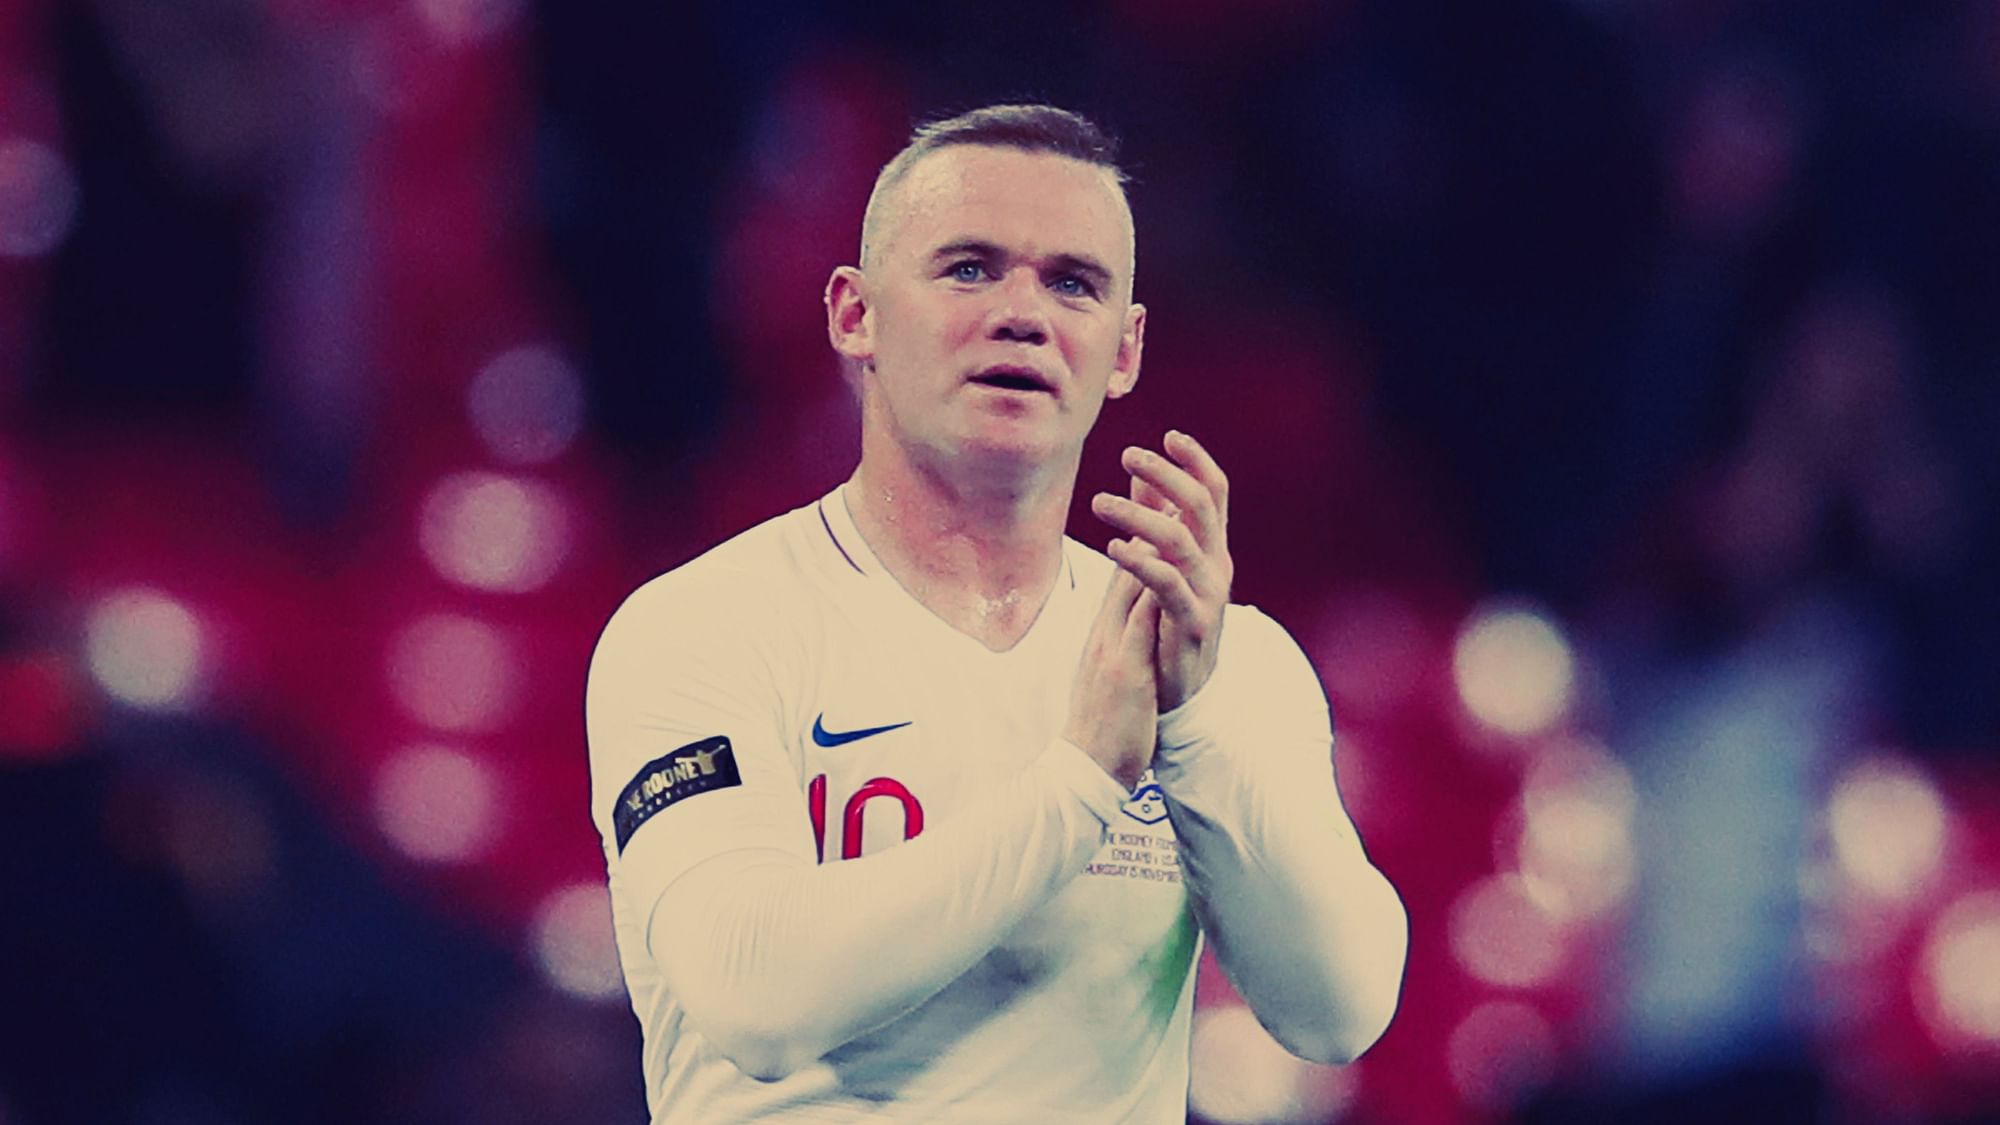 Wayne Rooney retires as England’s all-time highest scorer, with 53 goals in 120 games